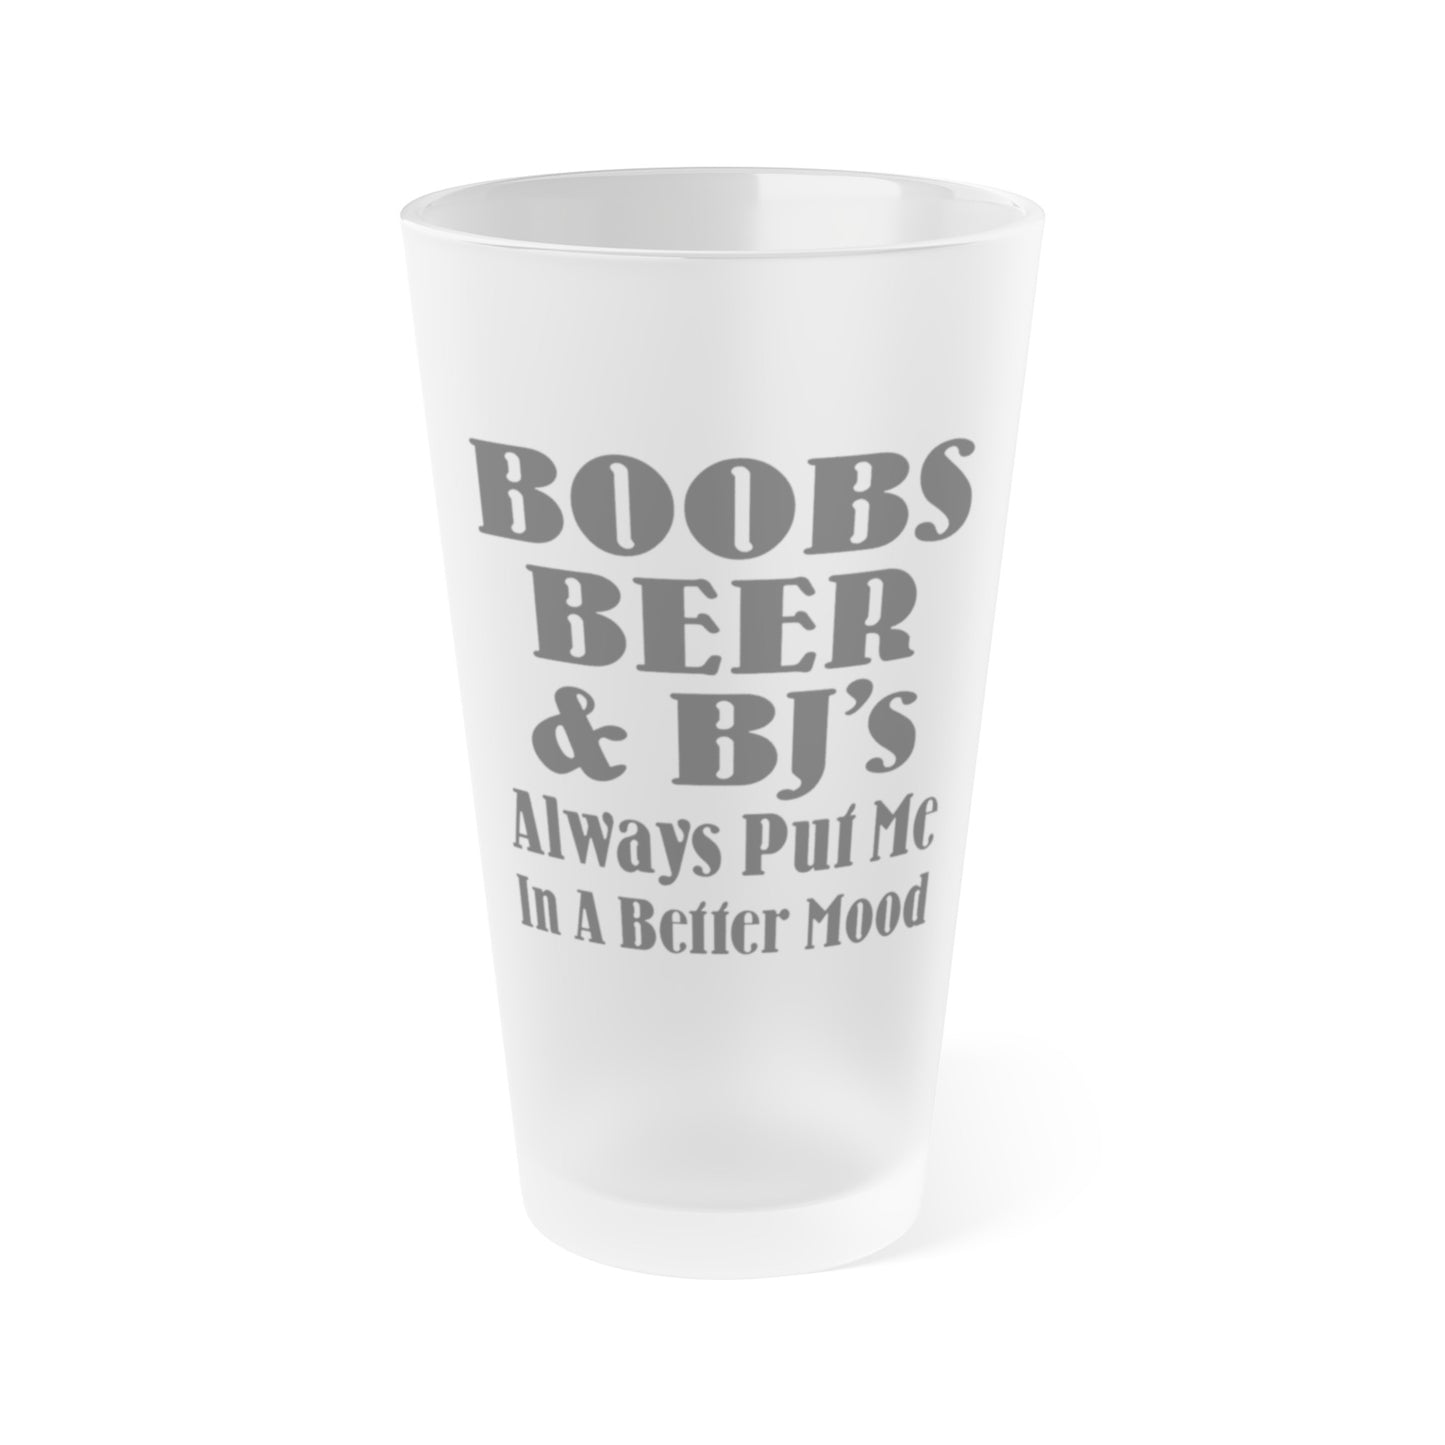 Boobs, Beer and BJ's Always Put Me In A Better Mood - Frosted Pint Glass, 16oz